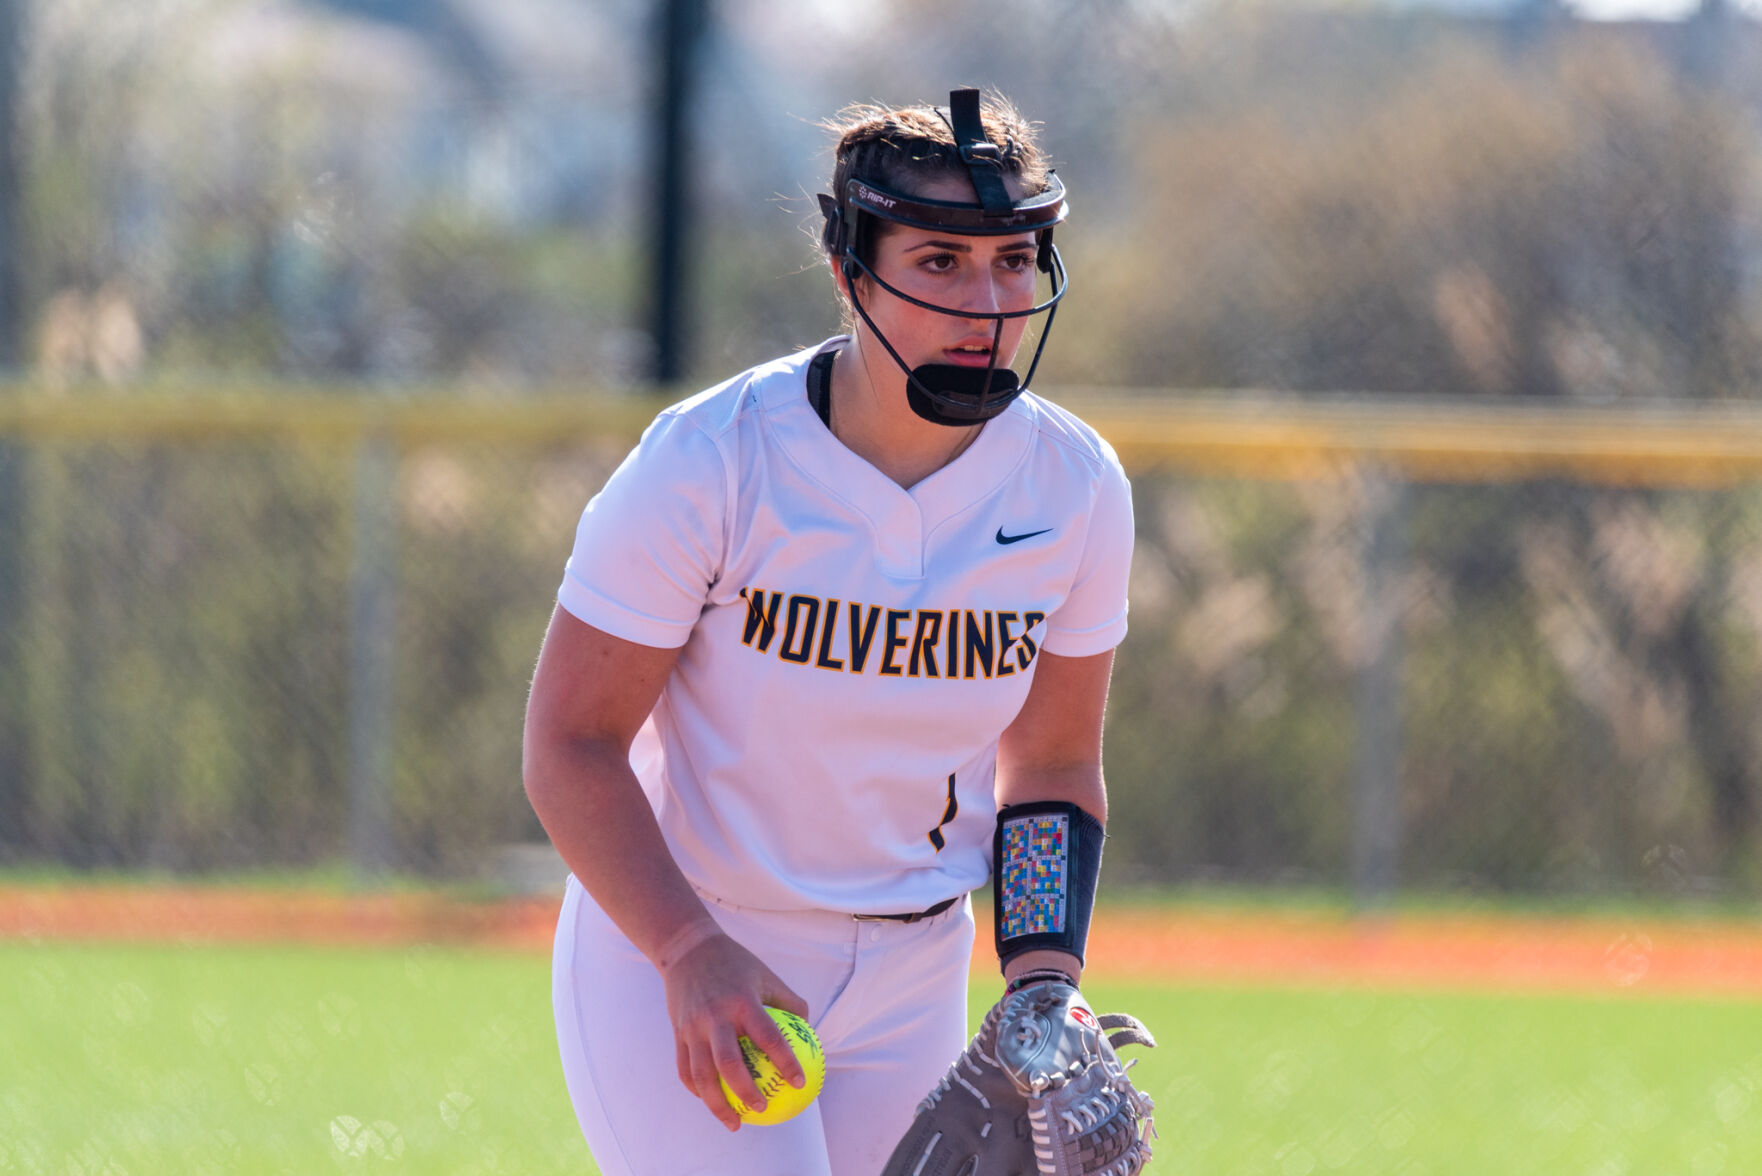 Niagara Falls’ Ava White Powers Past Batters with 5 New Pitches